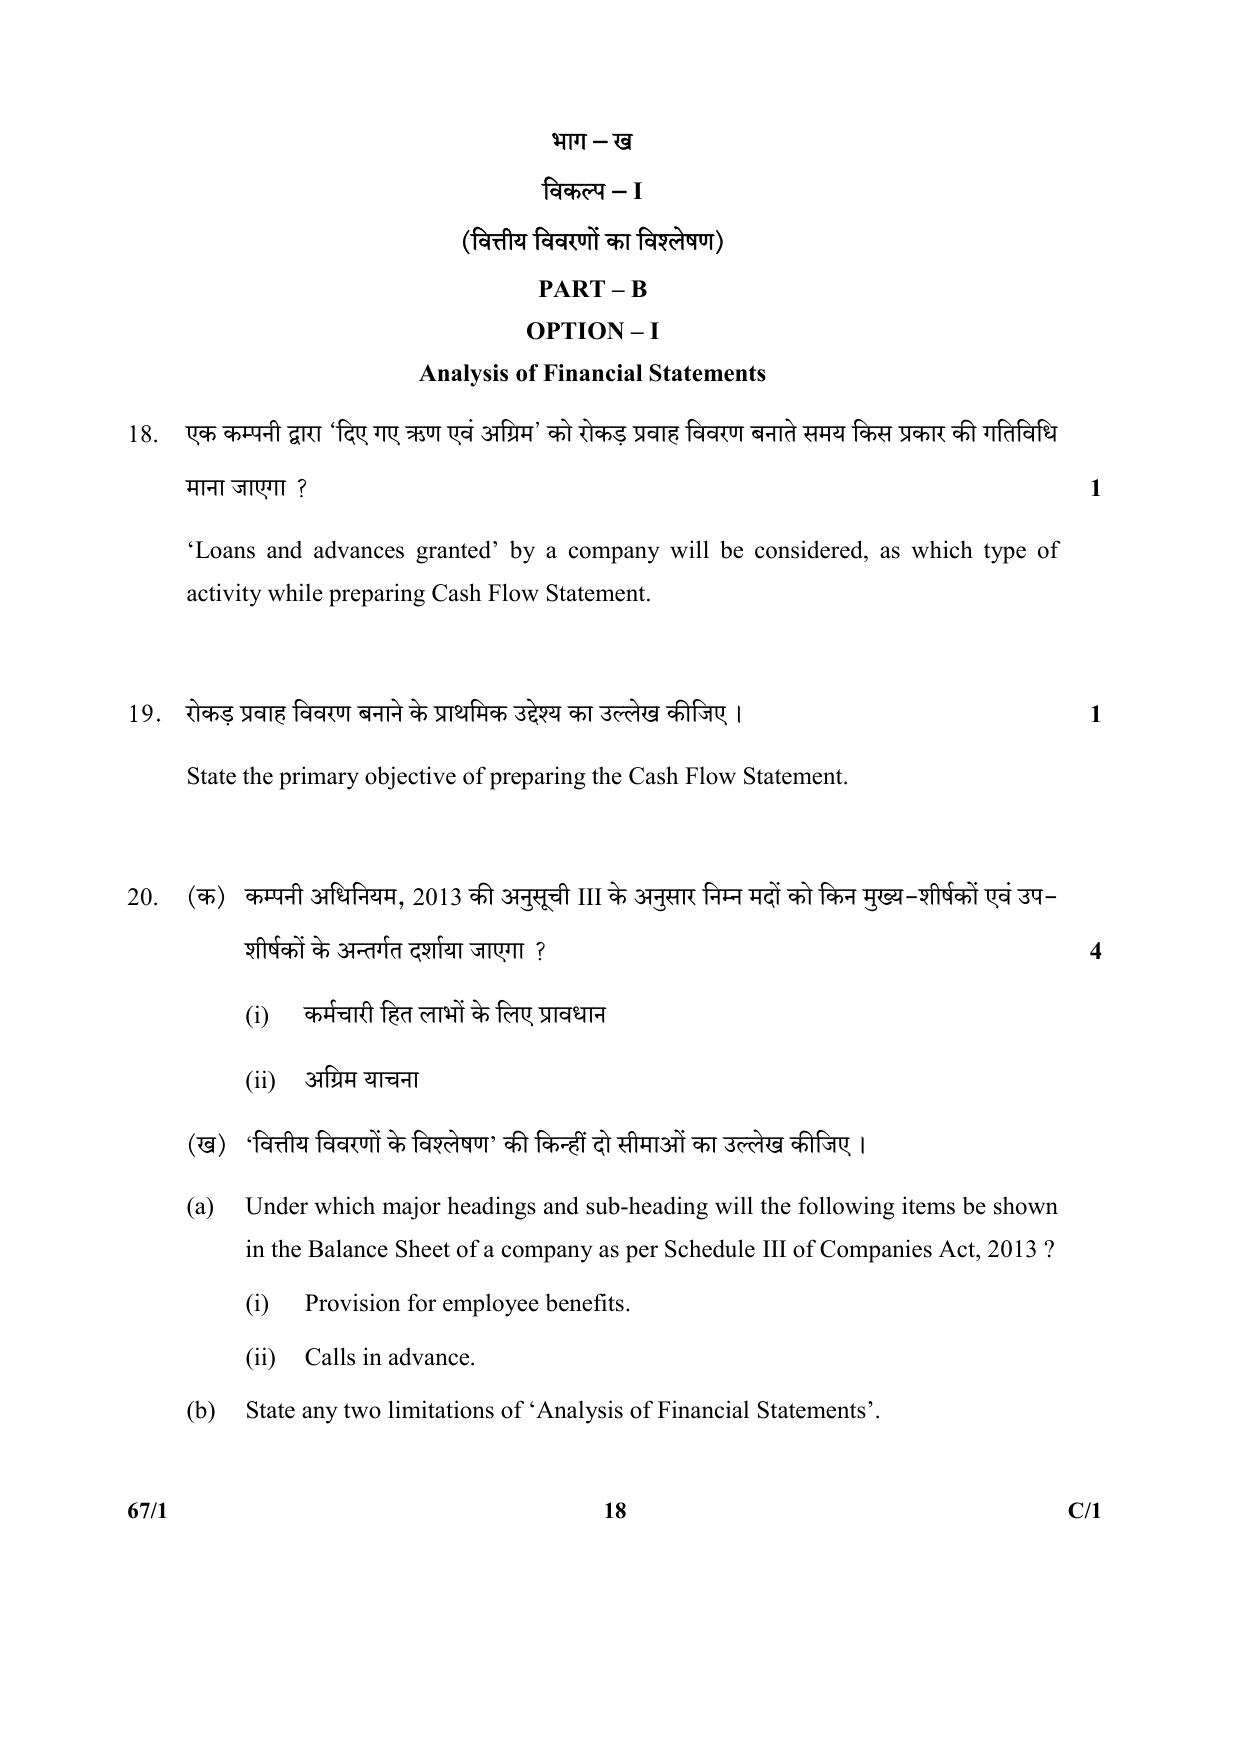 CBSE Class 12 67-1  (Accountancy) 2018 Compartment Question Paper - Page 18